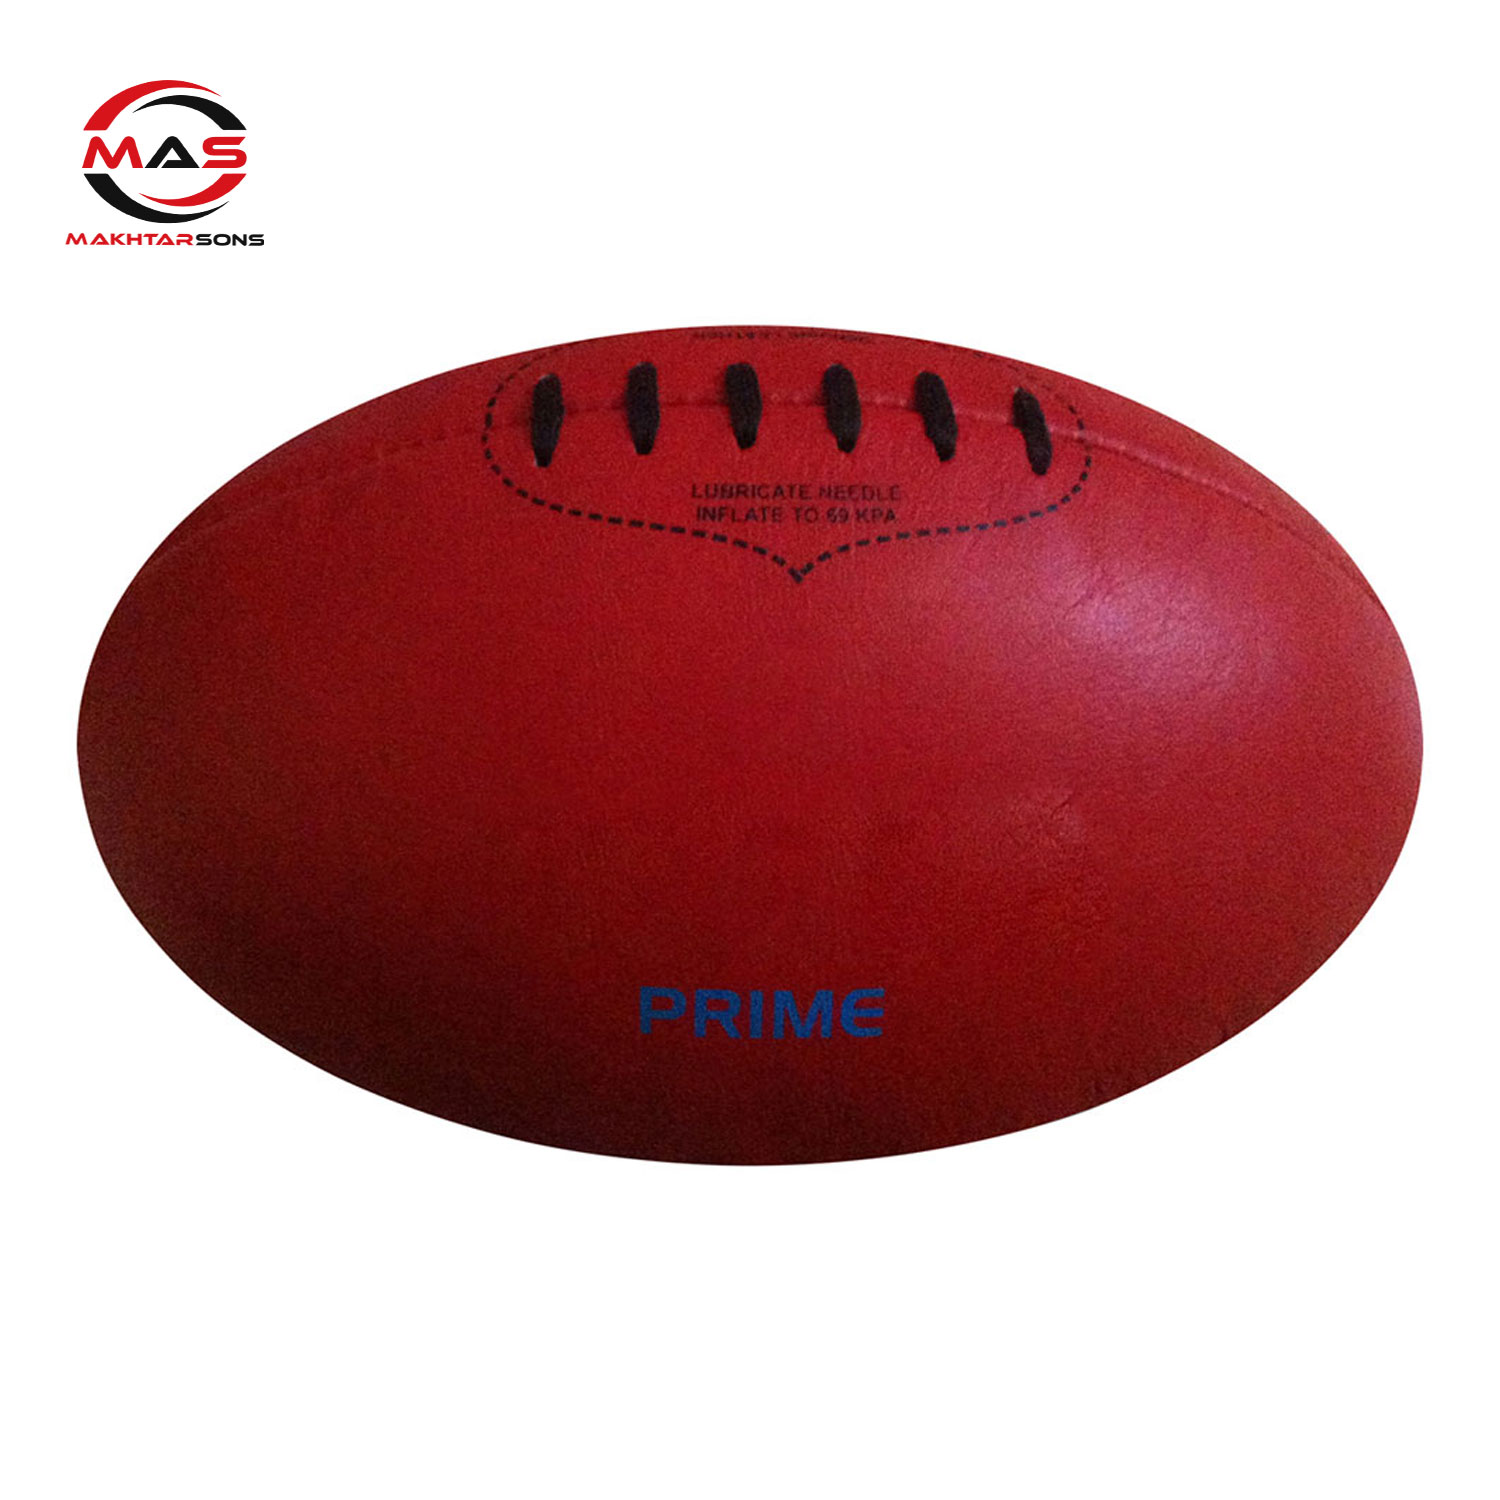 RUGBY BALL | MAS 435